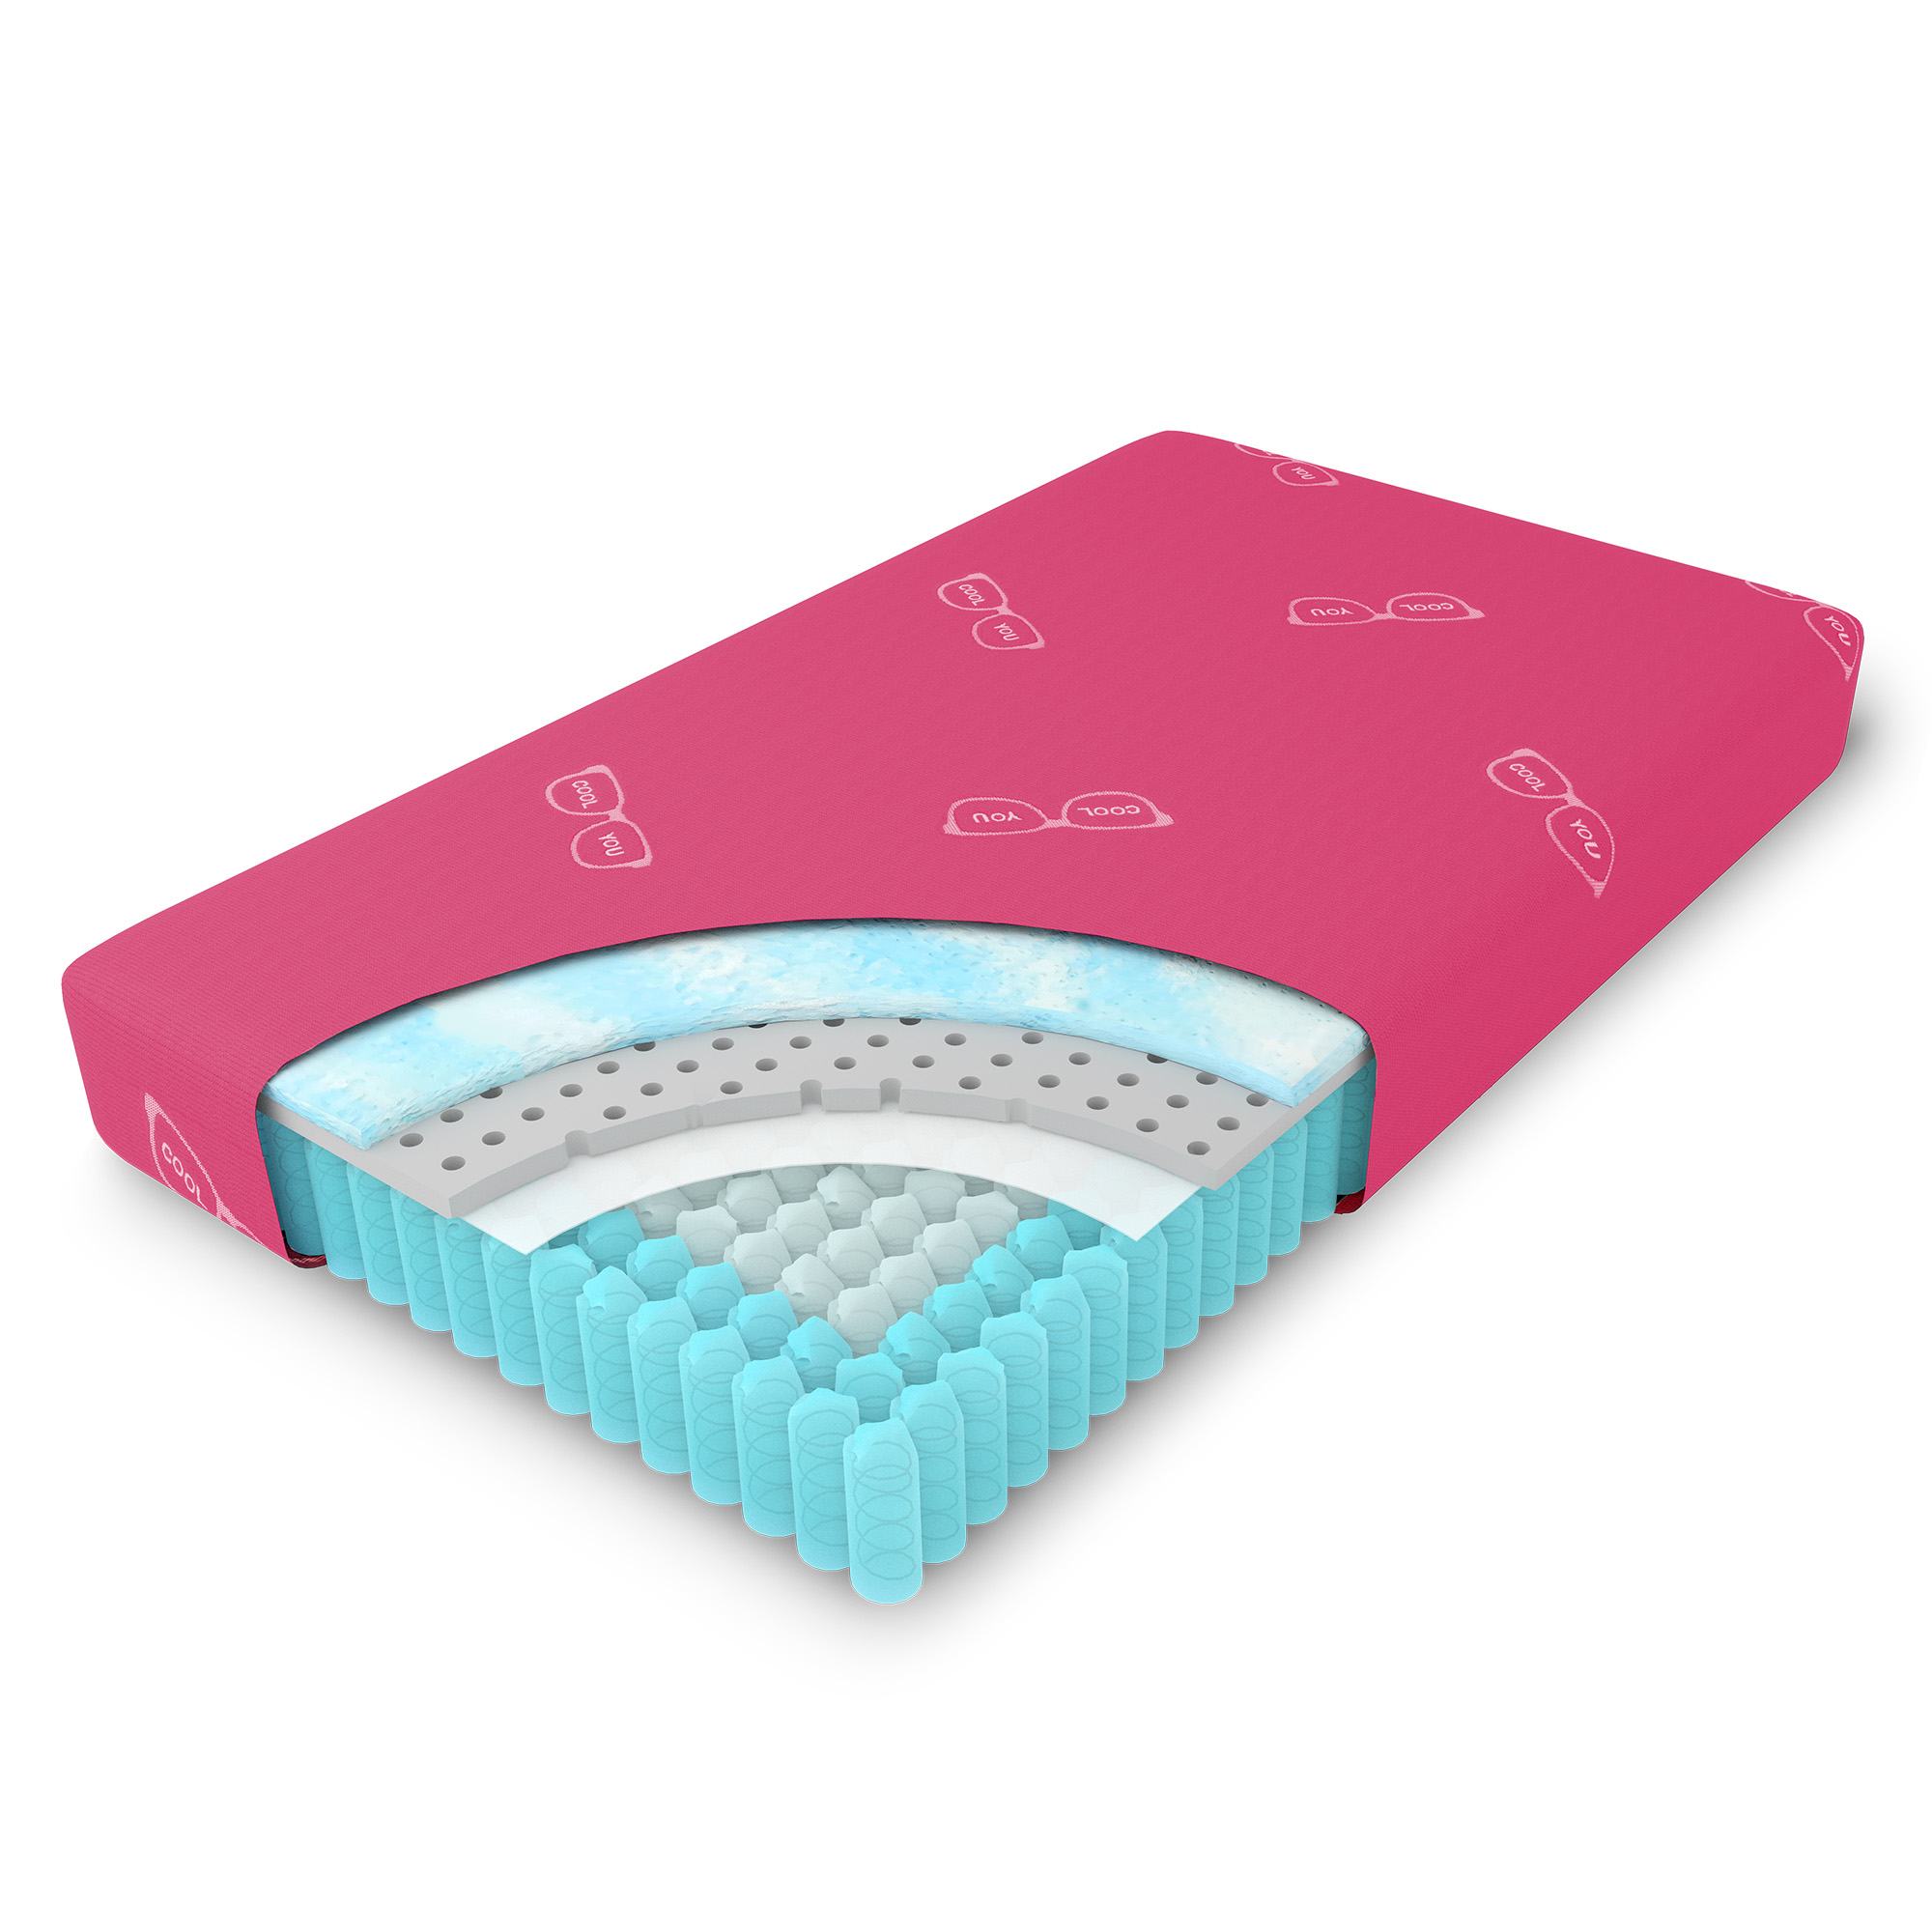 Photo of the Glideaway Youth pink mattress.